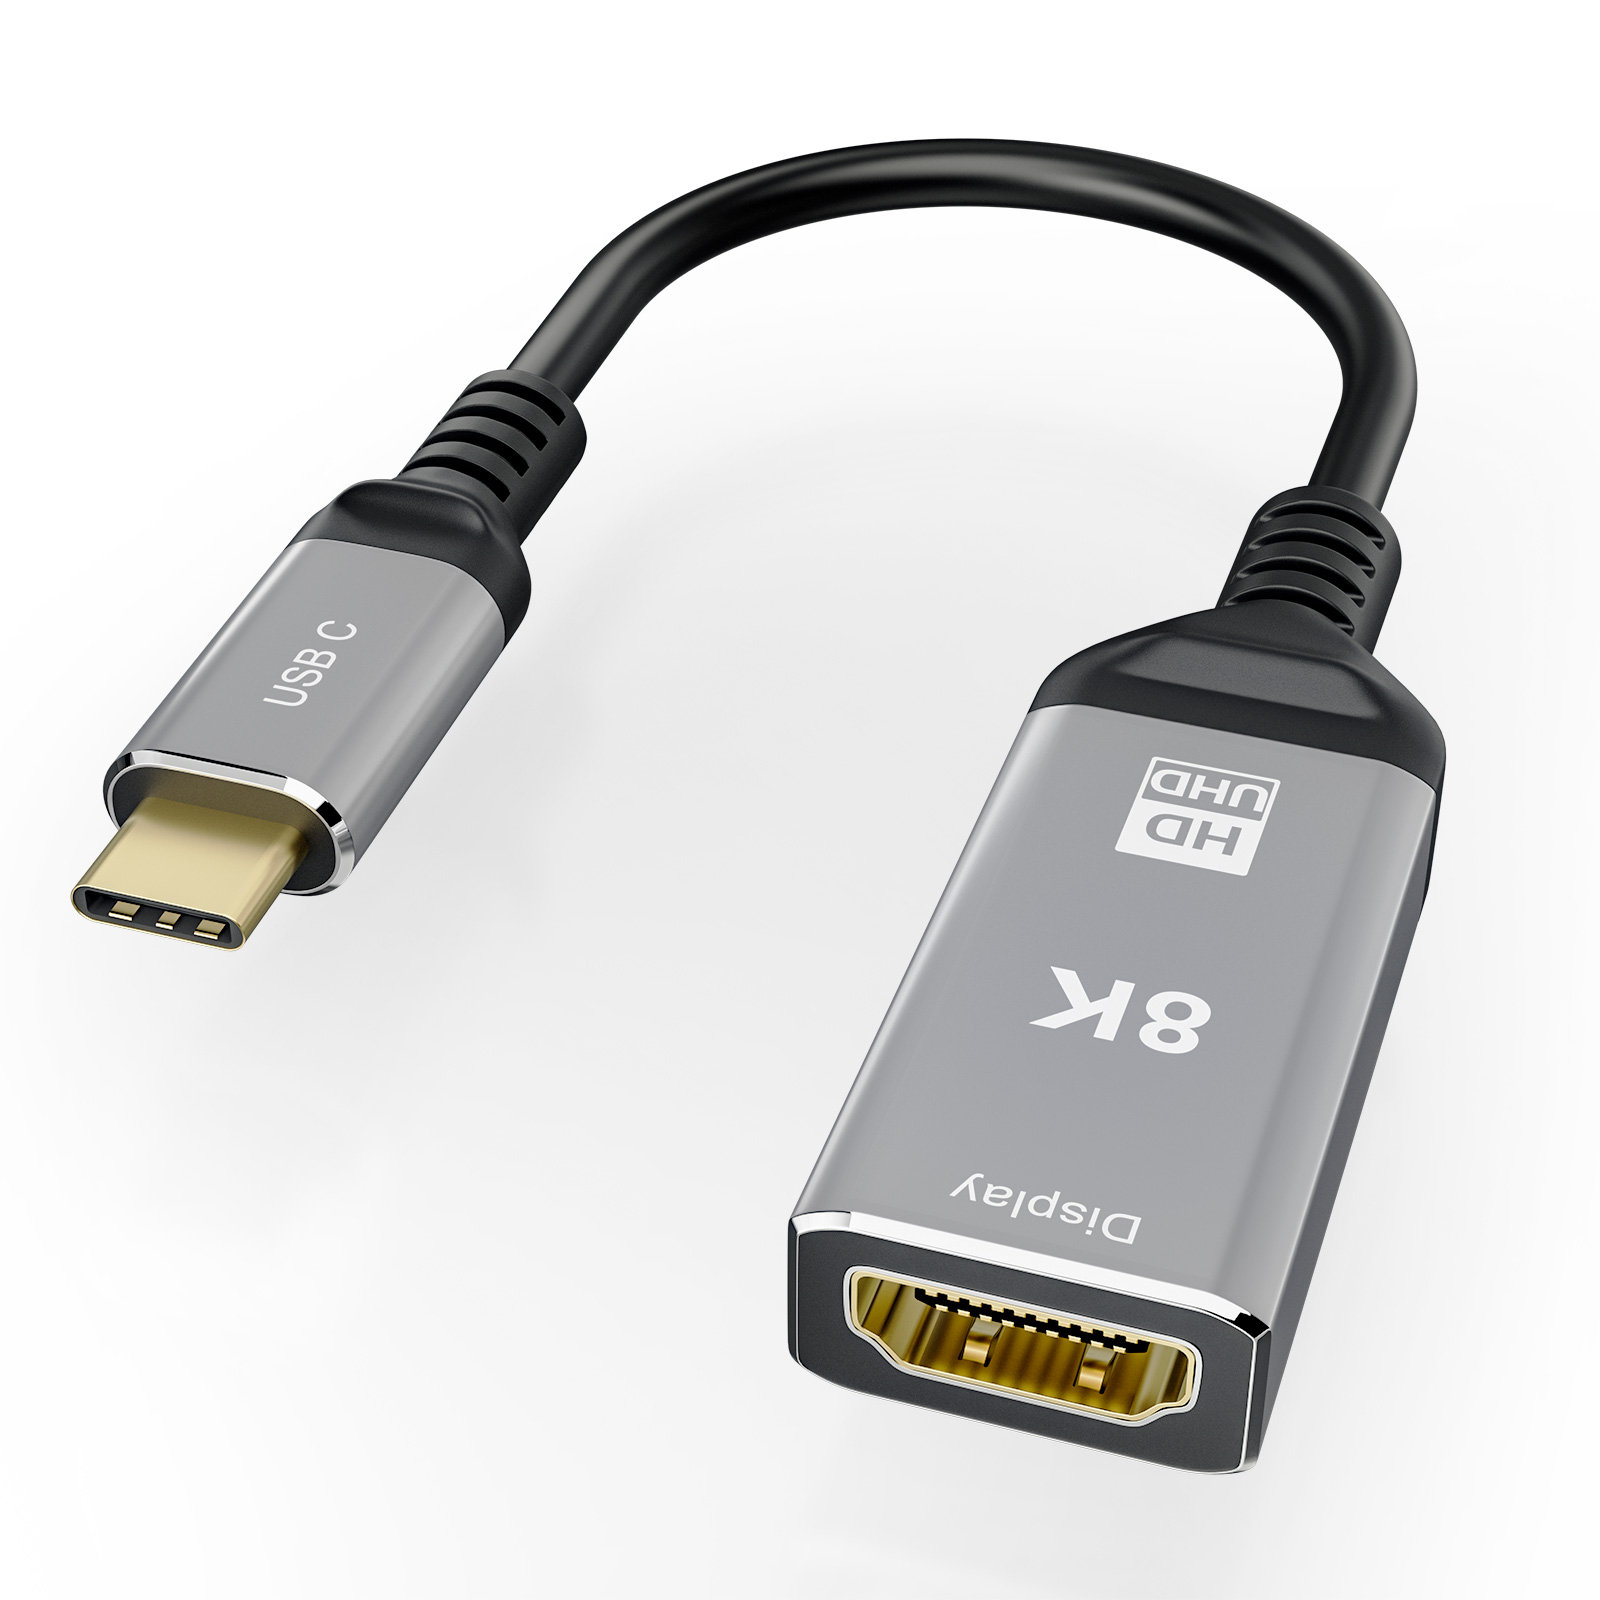 6ft (2m) USB-C to HDMI Adapter Cable, 8K - USB-C Display Adapters, Display  & Video Adapters